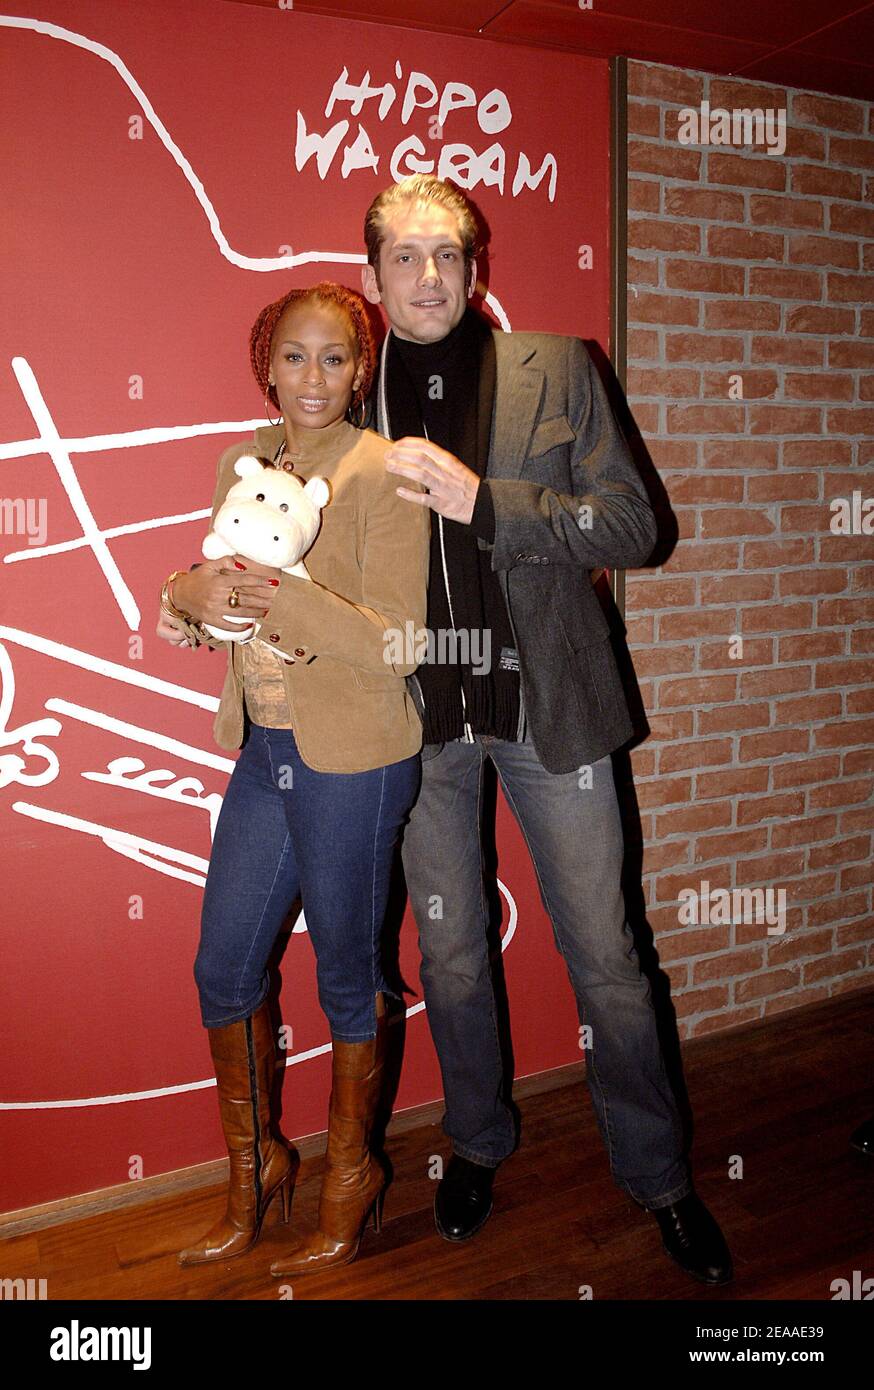 U.S. choreographer Mia Frye and Olivier the Bachelor attend the opening party of the new Hippotamus 'Hippo Wagram' restaurant in Paris, France on December 1, 2005. Photo By Giancarlo Gorassini/ABACAPRESS.COM Stock Photo